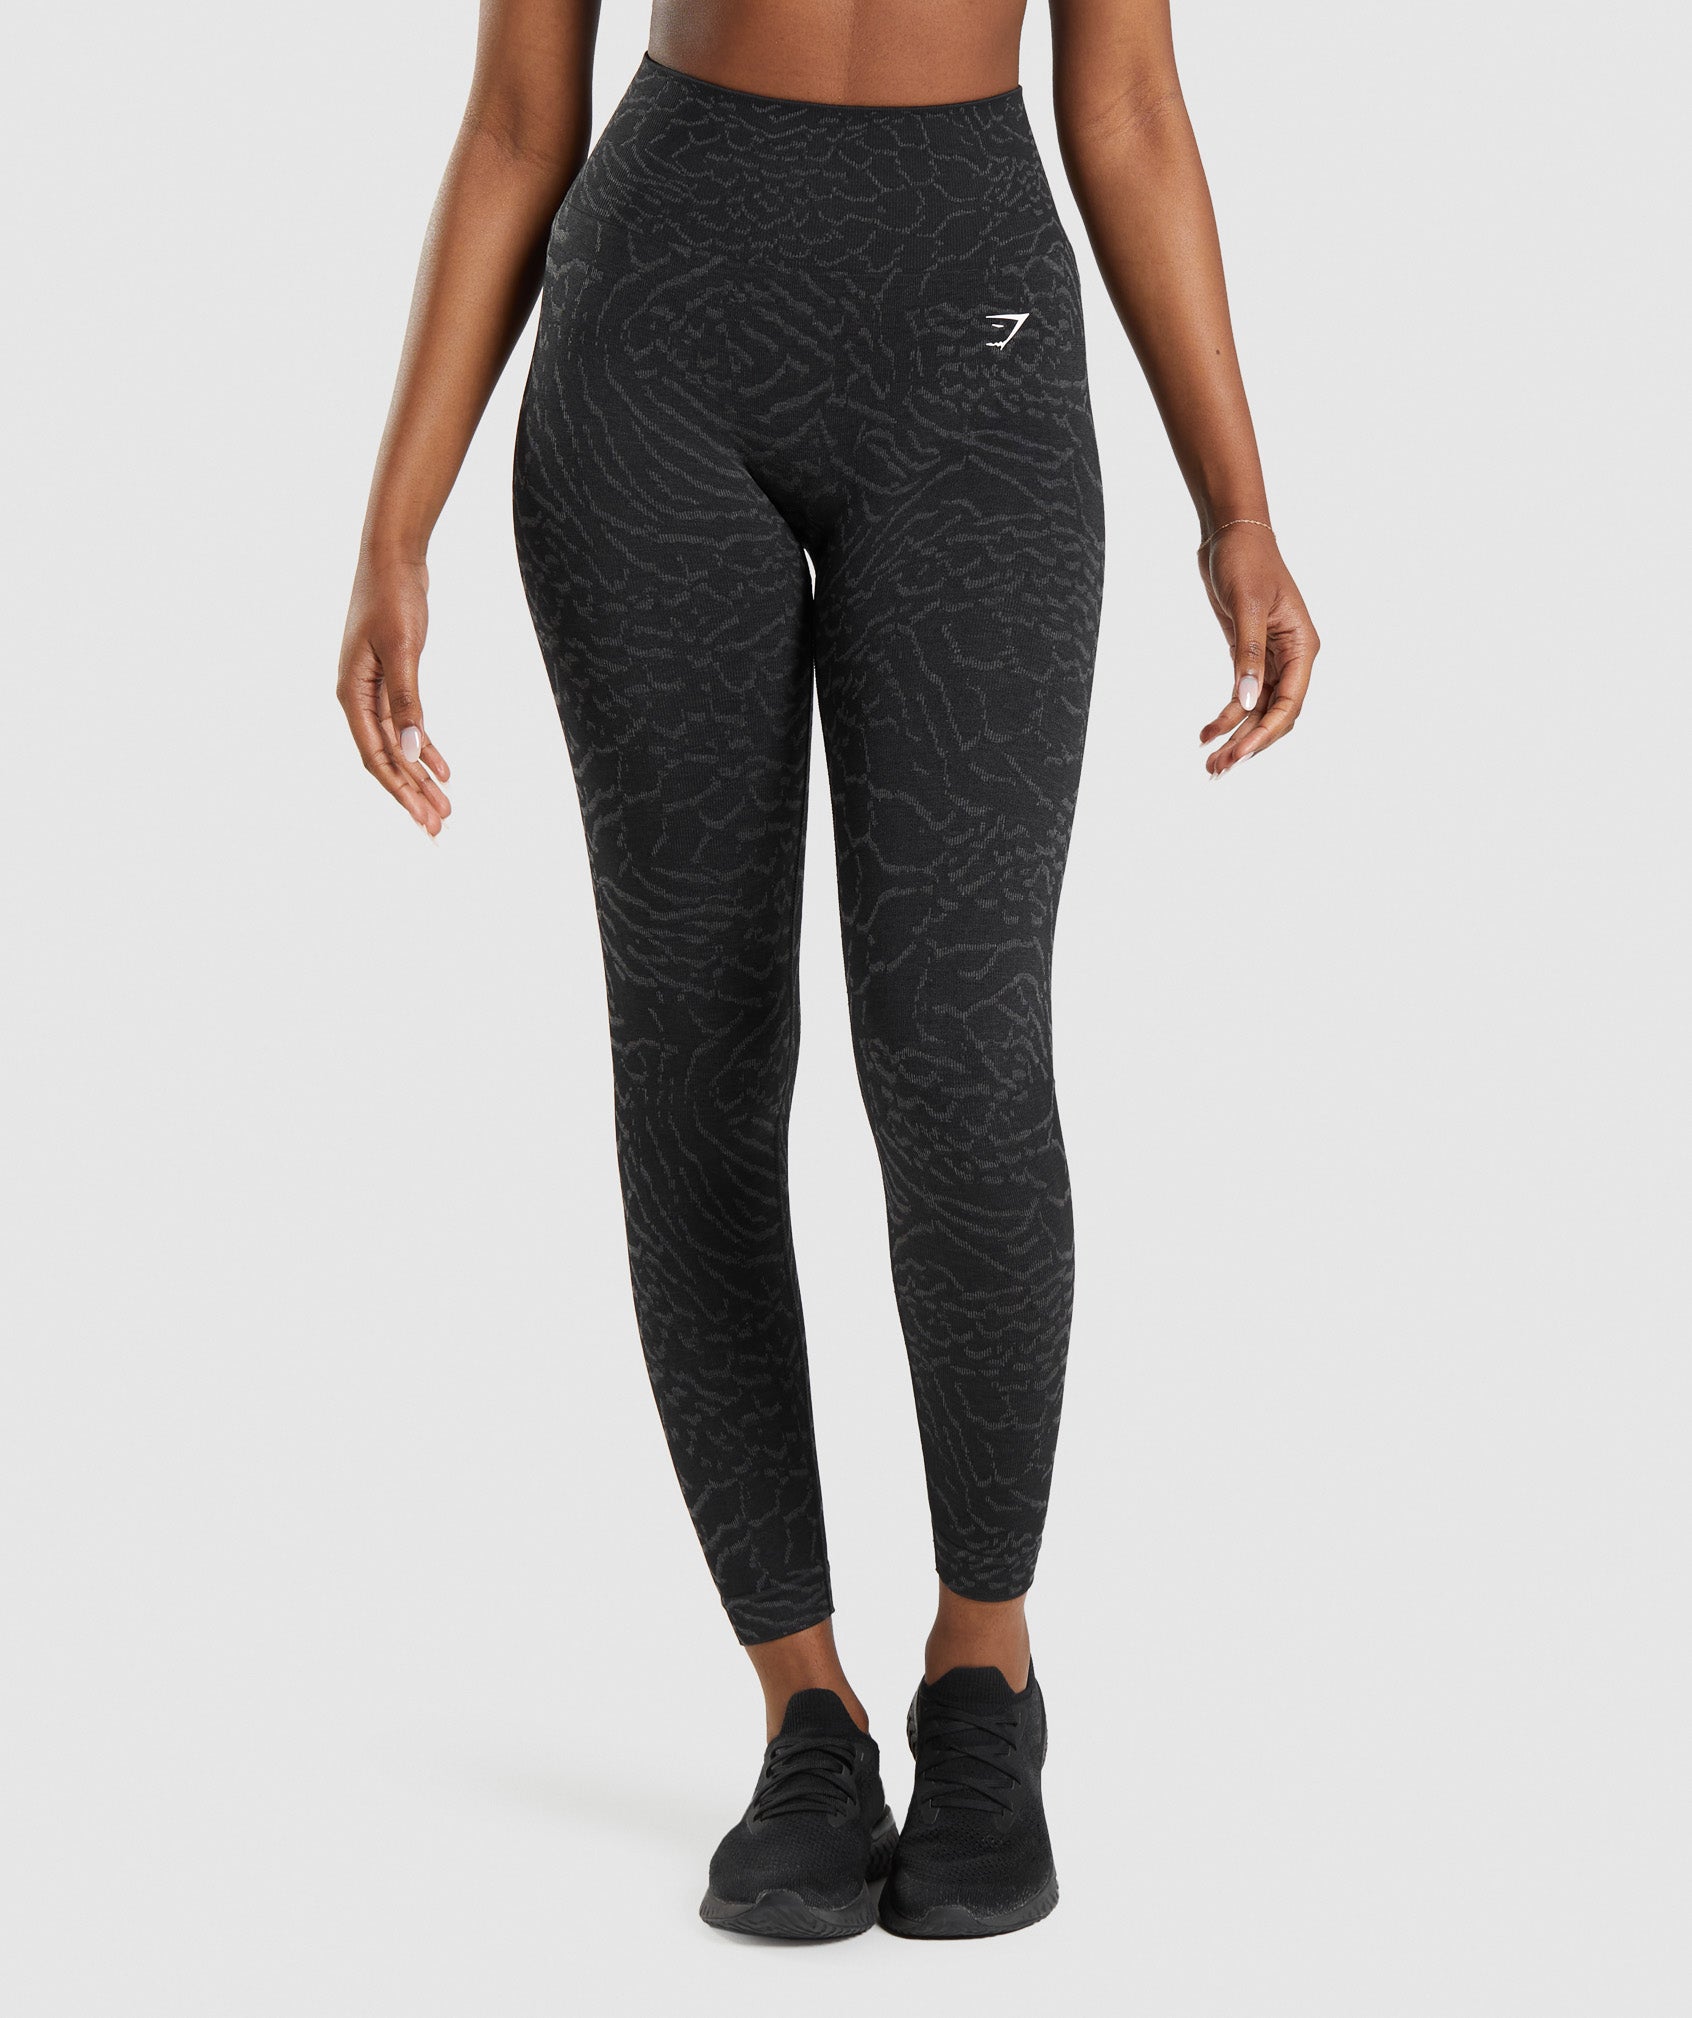 Gymshark Adapt Animal Seamless Leggings - Reef  Cherry Brown Medium - $48  (25% Off Retail) New With Tags - From Ilana